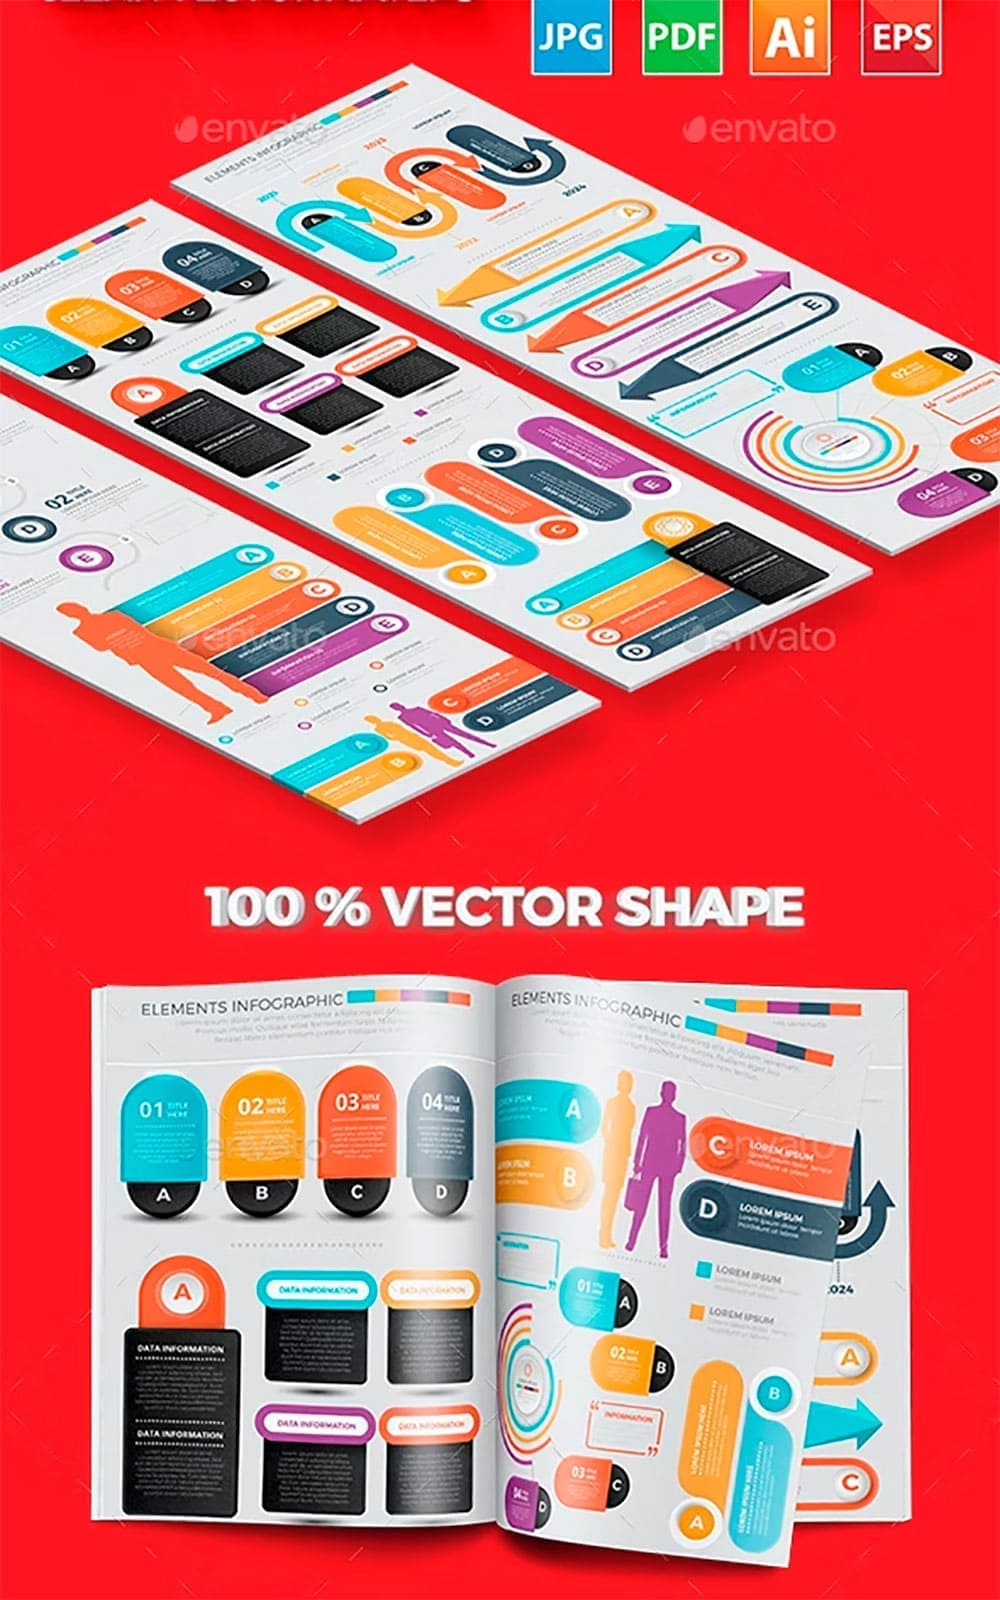 Infographic elements design, picture for pinterest.